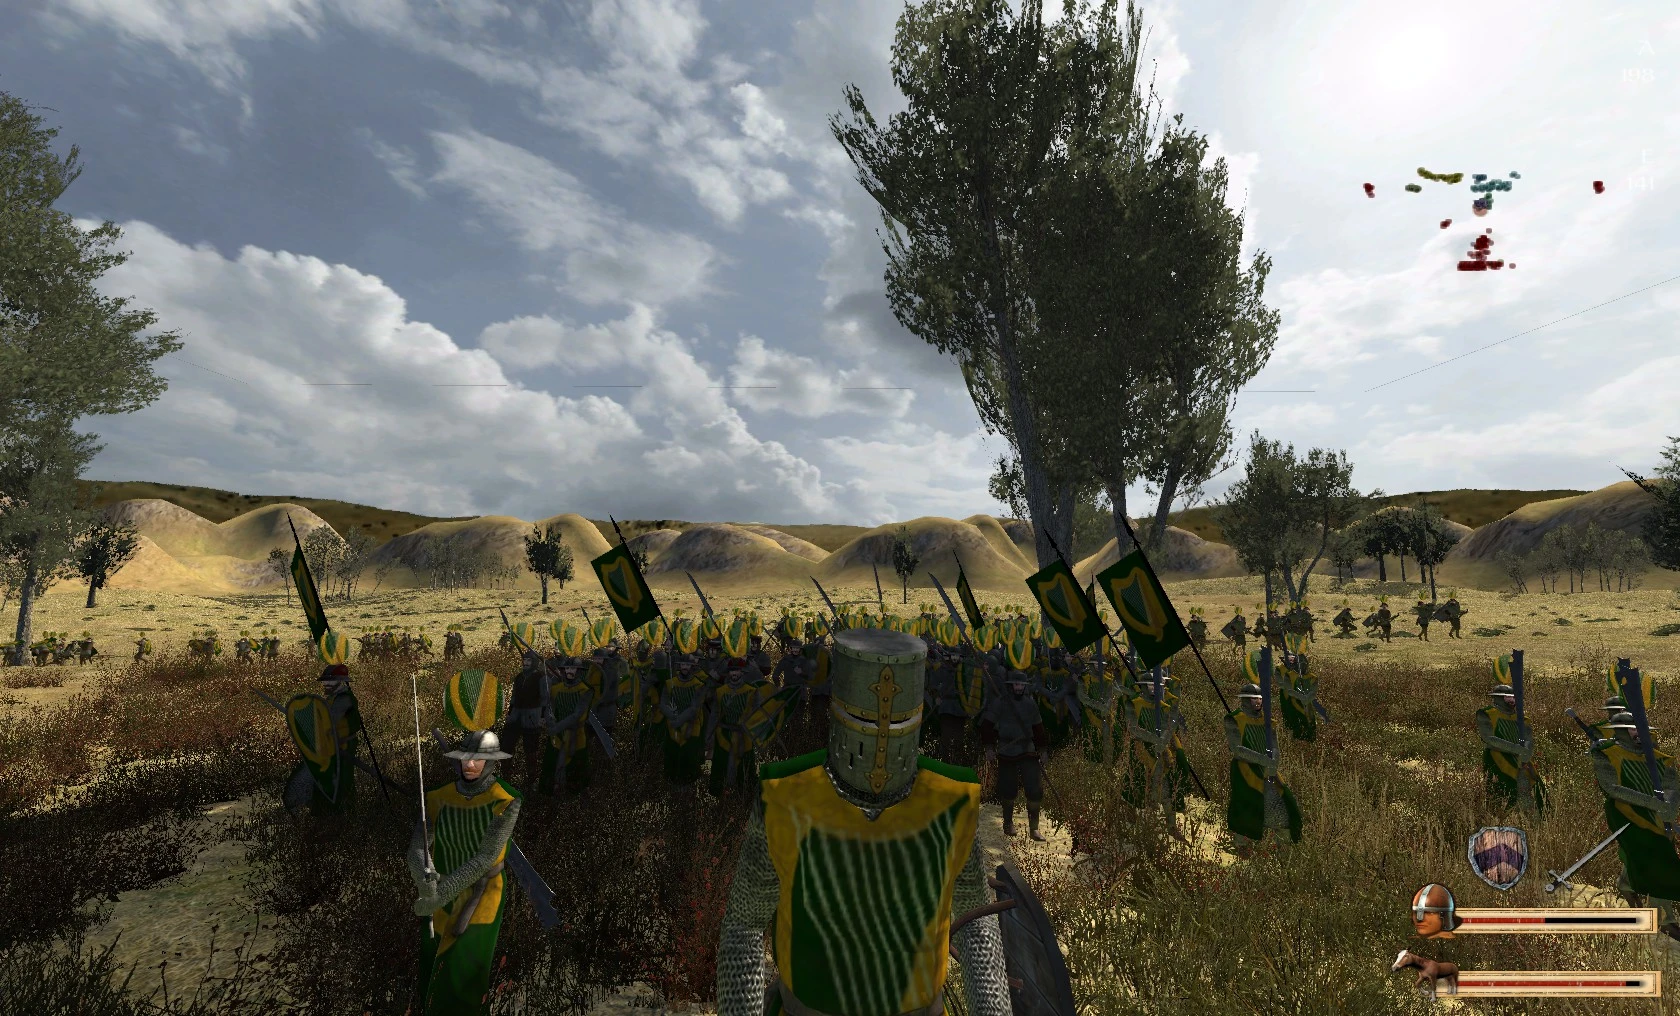 Mount blade warband города